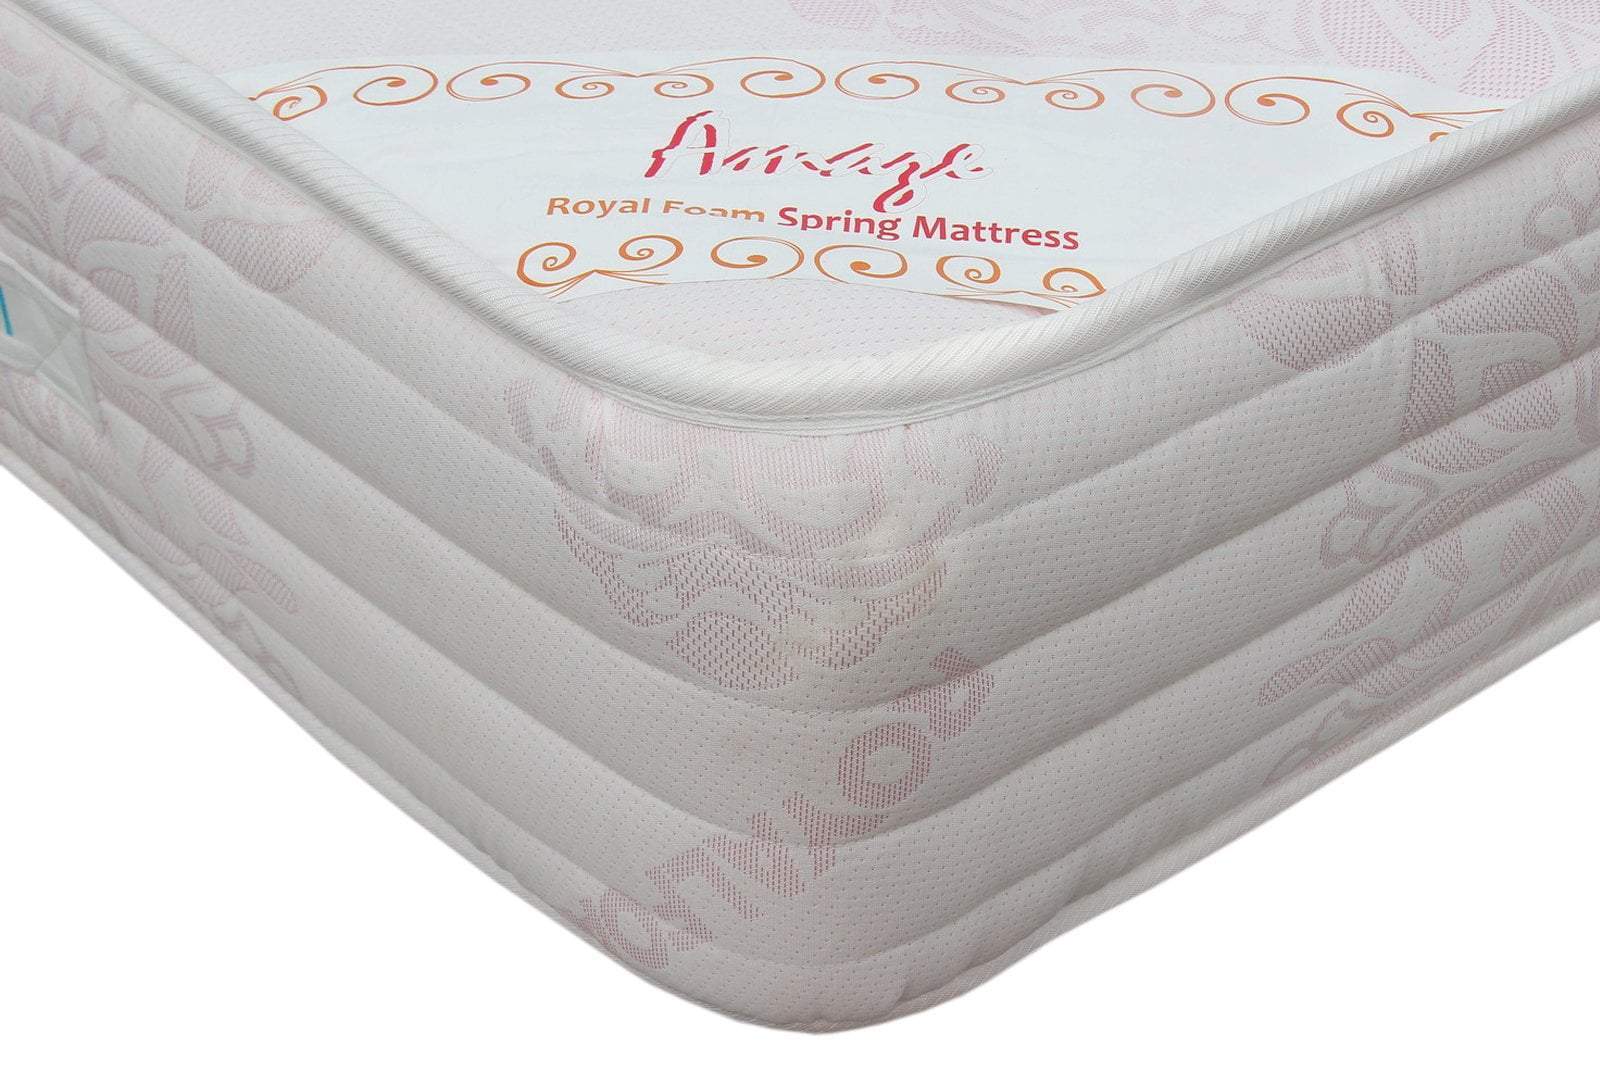 Royal Amaze Spring JACQUARD-Fully Quilted Mattress [75 x 72 x 10"] [6ft x 6ft x 10inches](Lagos Only)